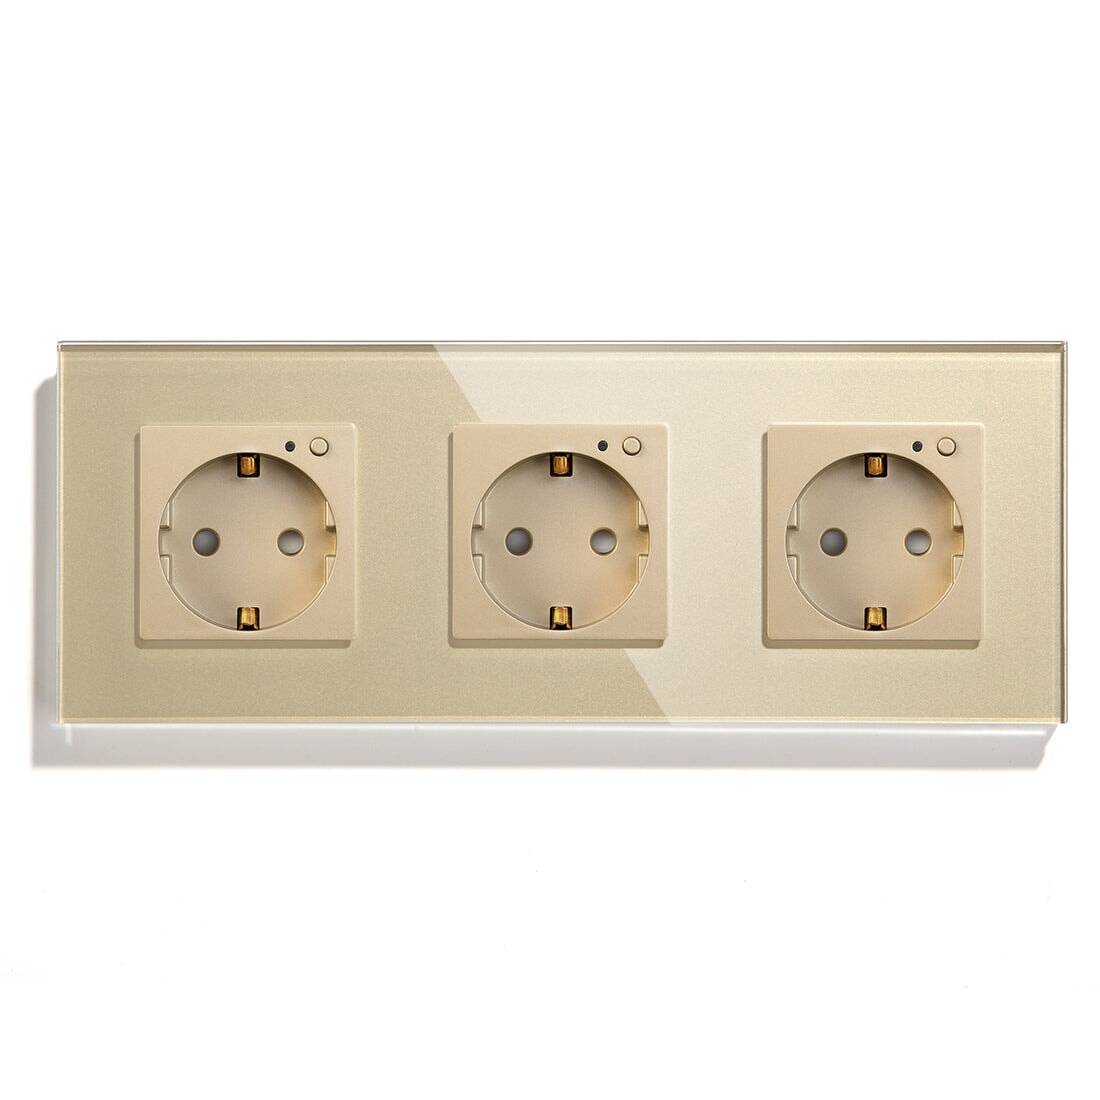 BSEED ZigBee EU Wall Sockets Power Outlets Kids Protection Wall Plates & Covers Bseedswitch golden Triple 